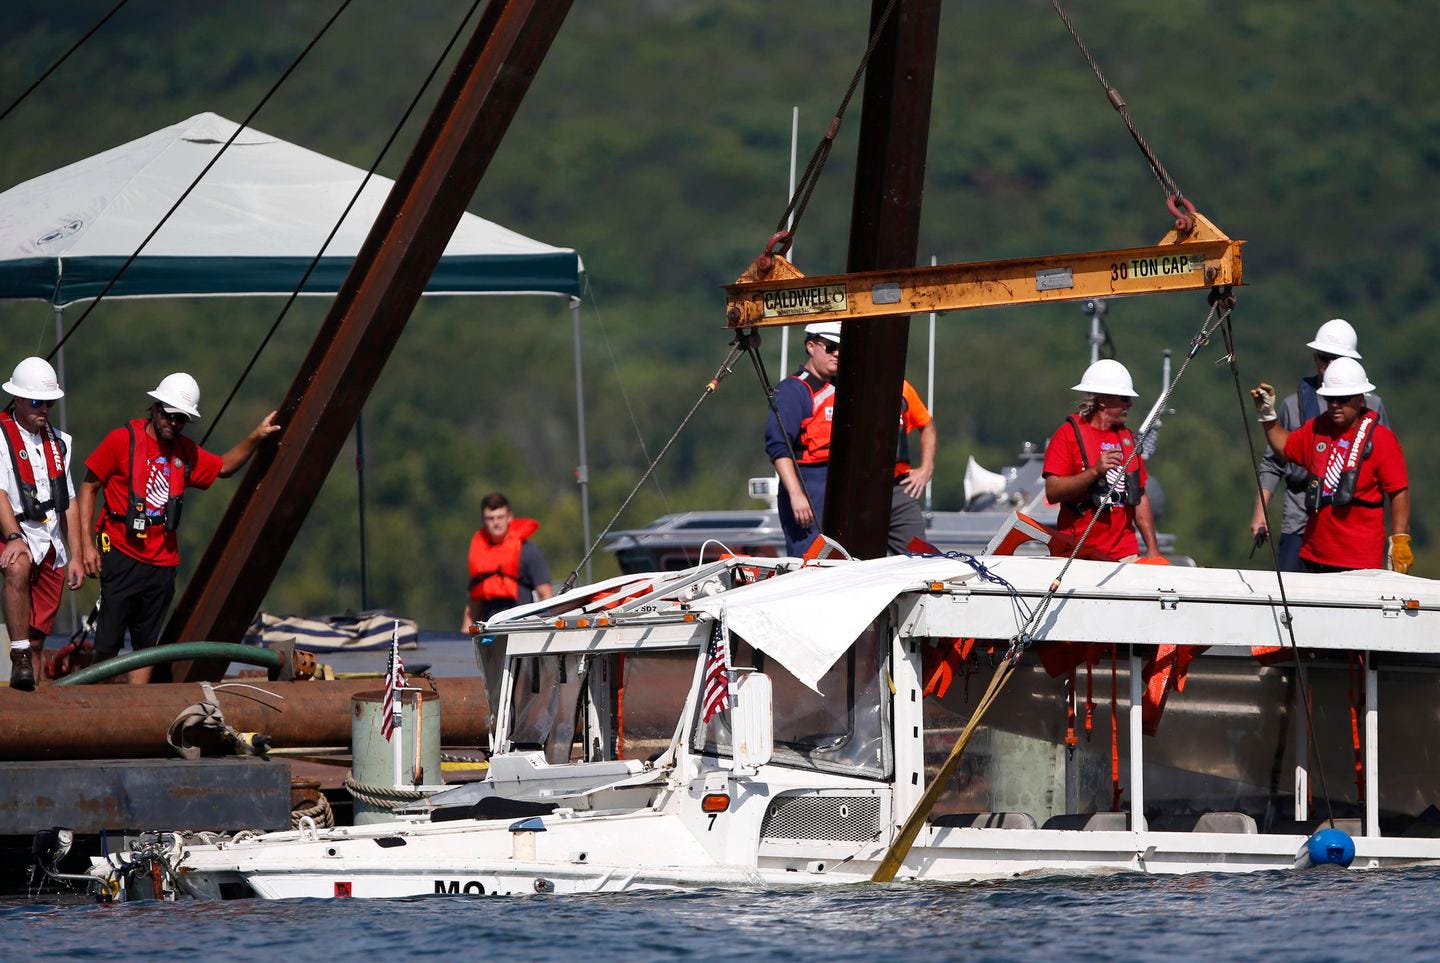 A duck boat that sank in Table Rock Lake in Branson, Mo., was raised after it went down the evening of July 19 after a thunderstorm generated near-hurricane strength winds, killing 17 people.